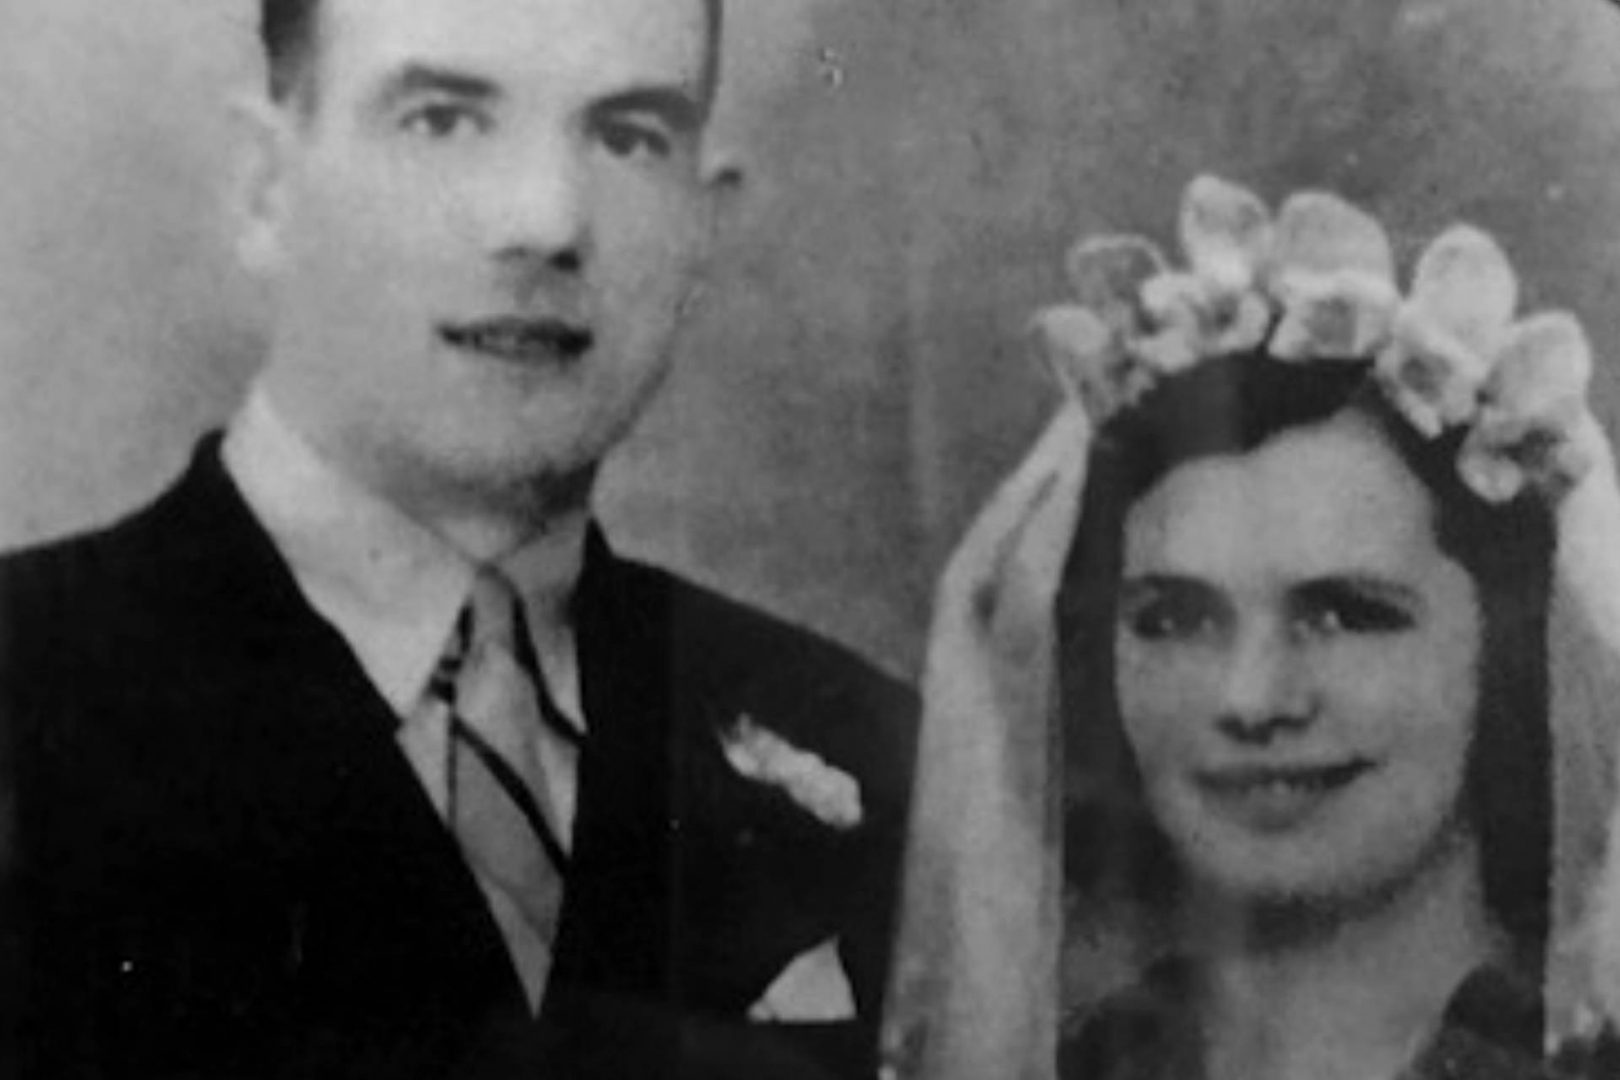 Sam and Freda's Wedding in 1945